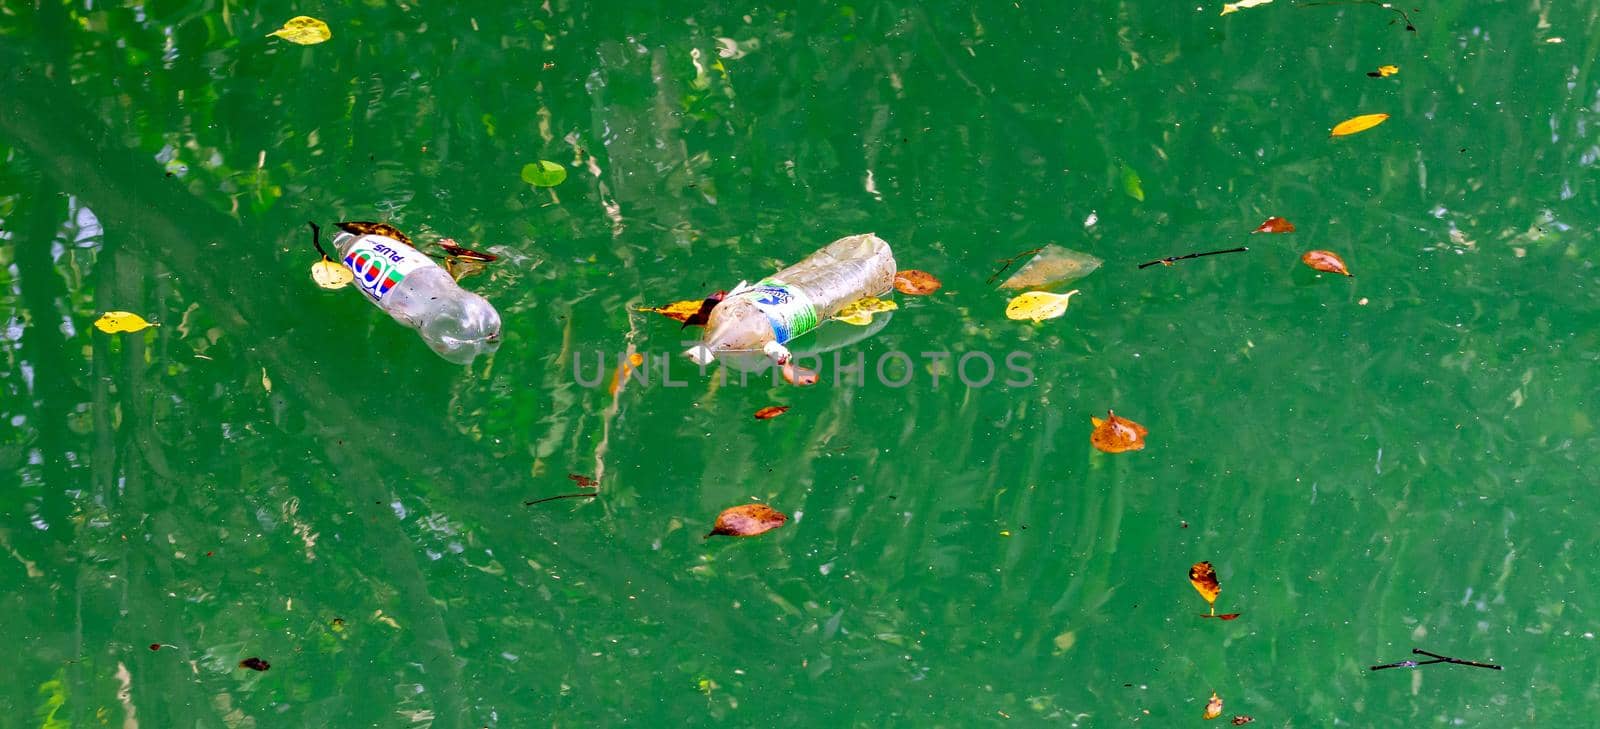 Bottled waters while floating on waters polluting the environment